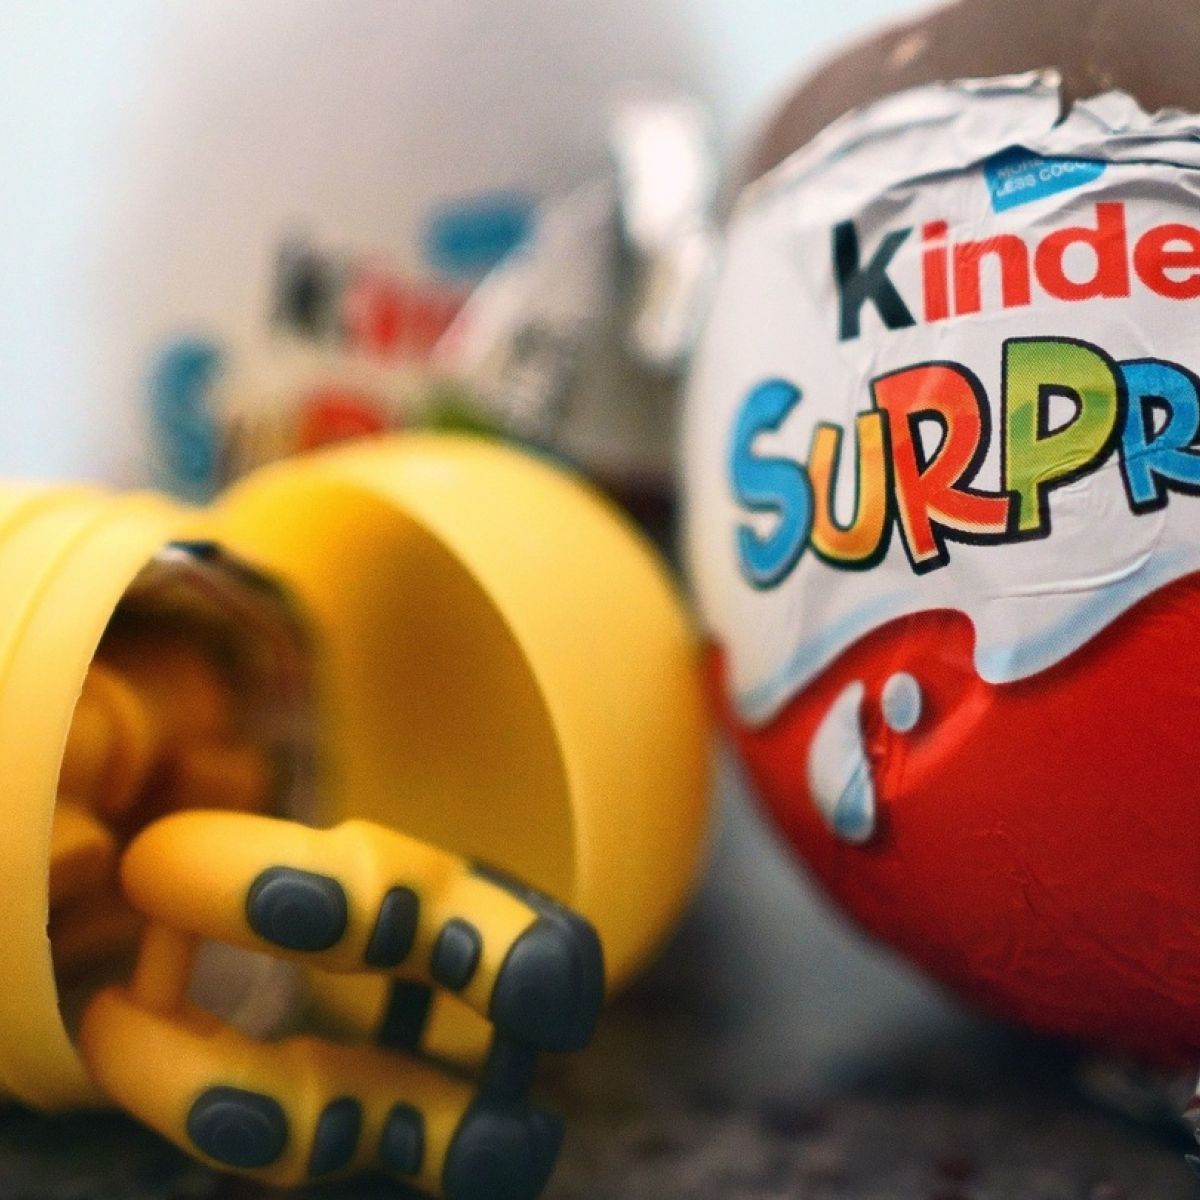 Kinder Eggs Recalled In Amity Vlog Gallery Of Images